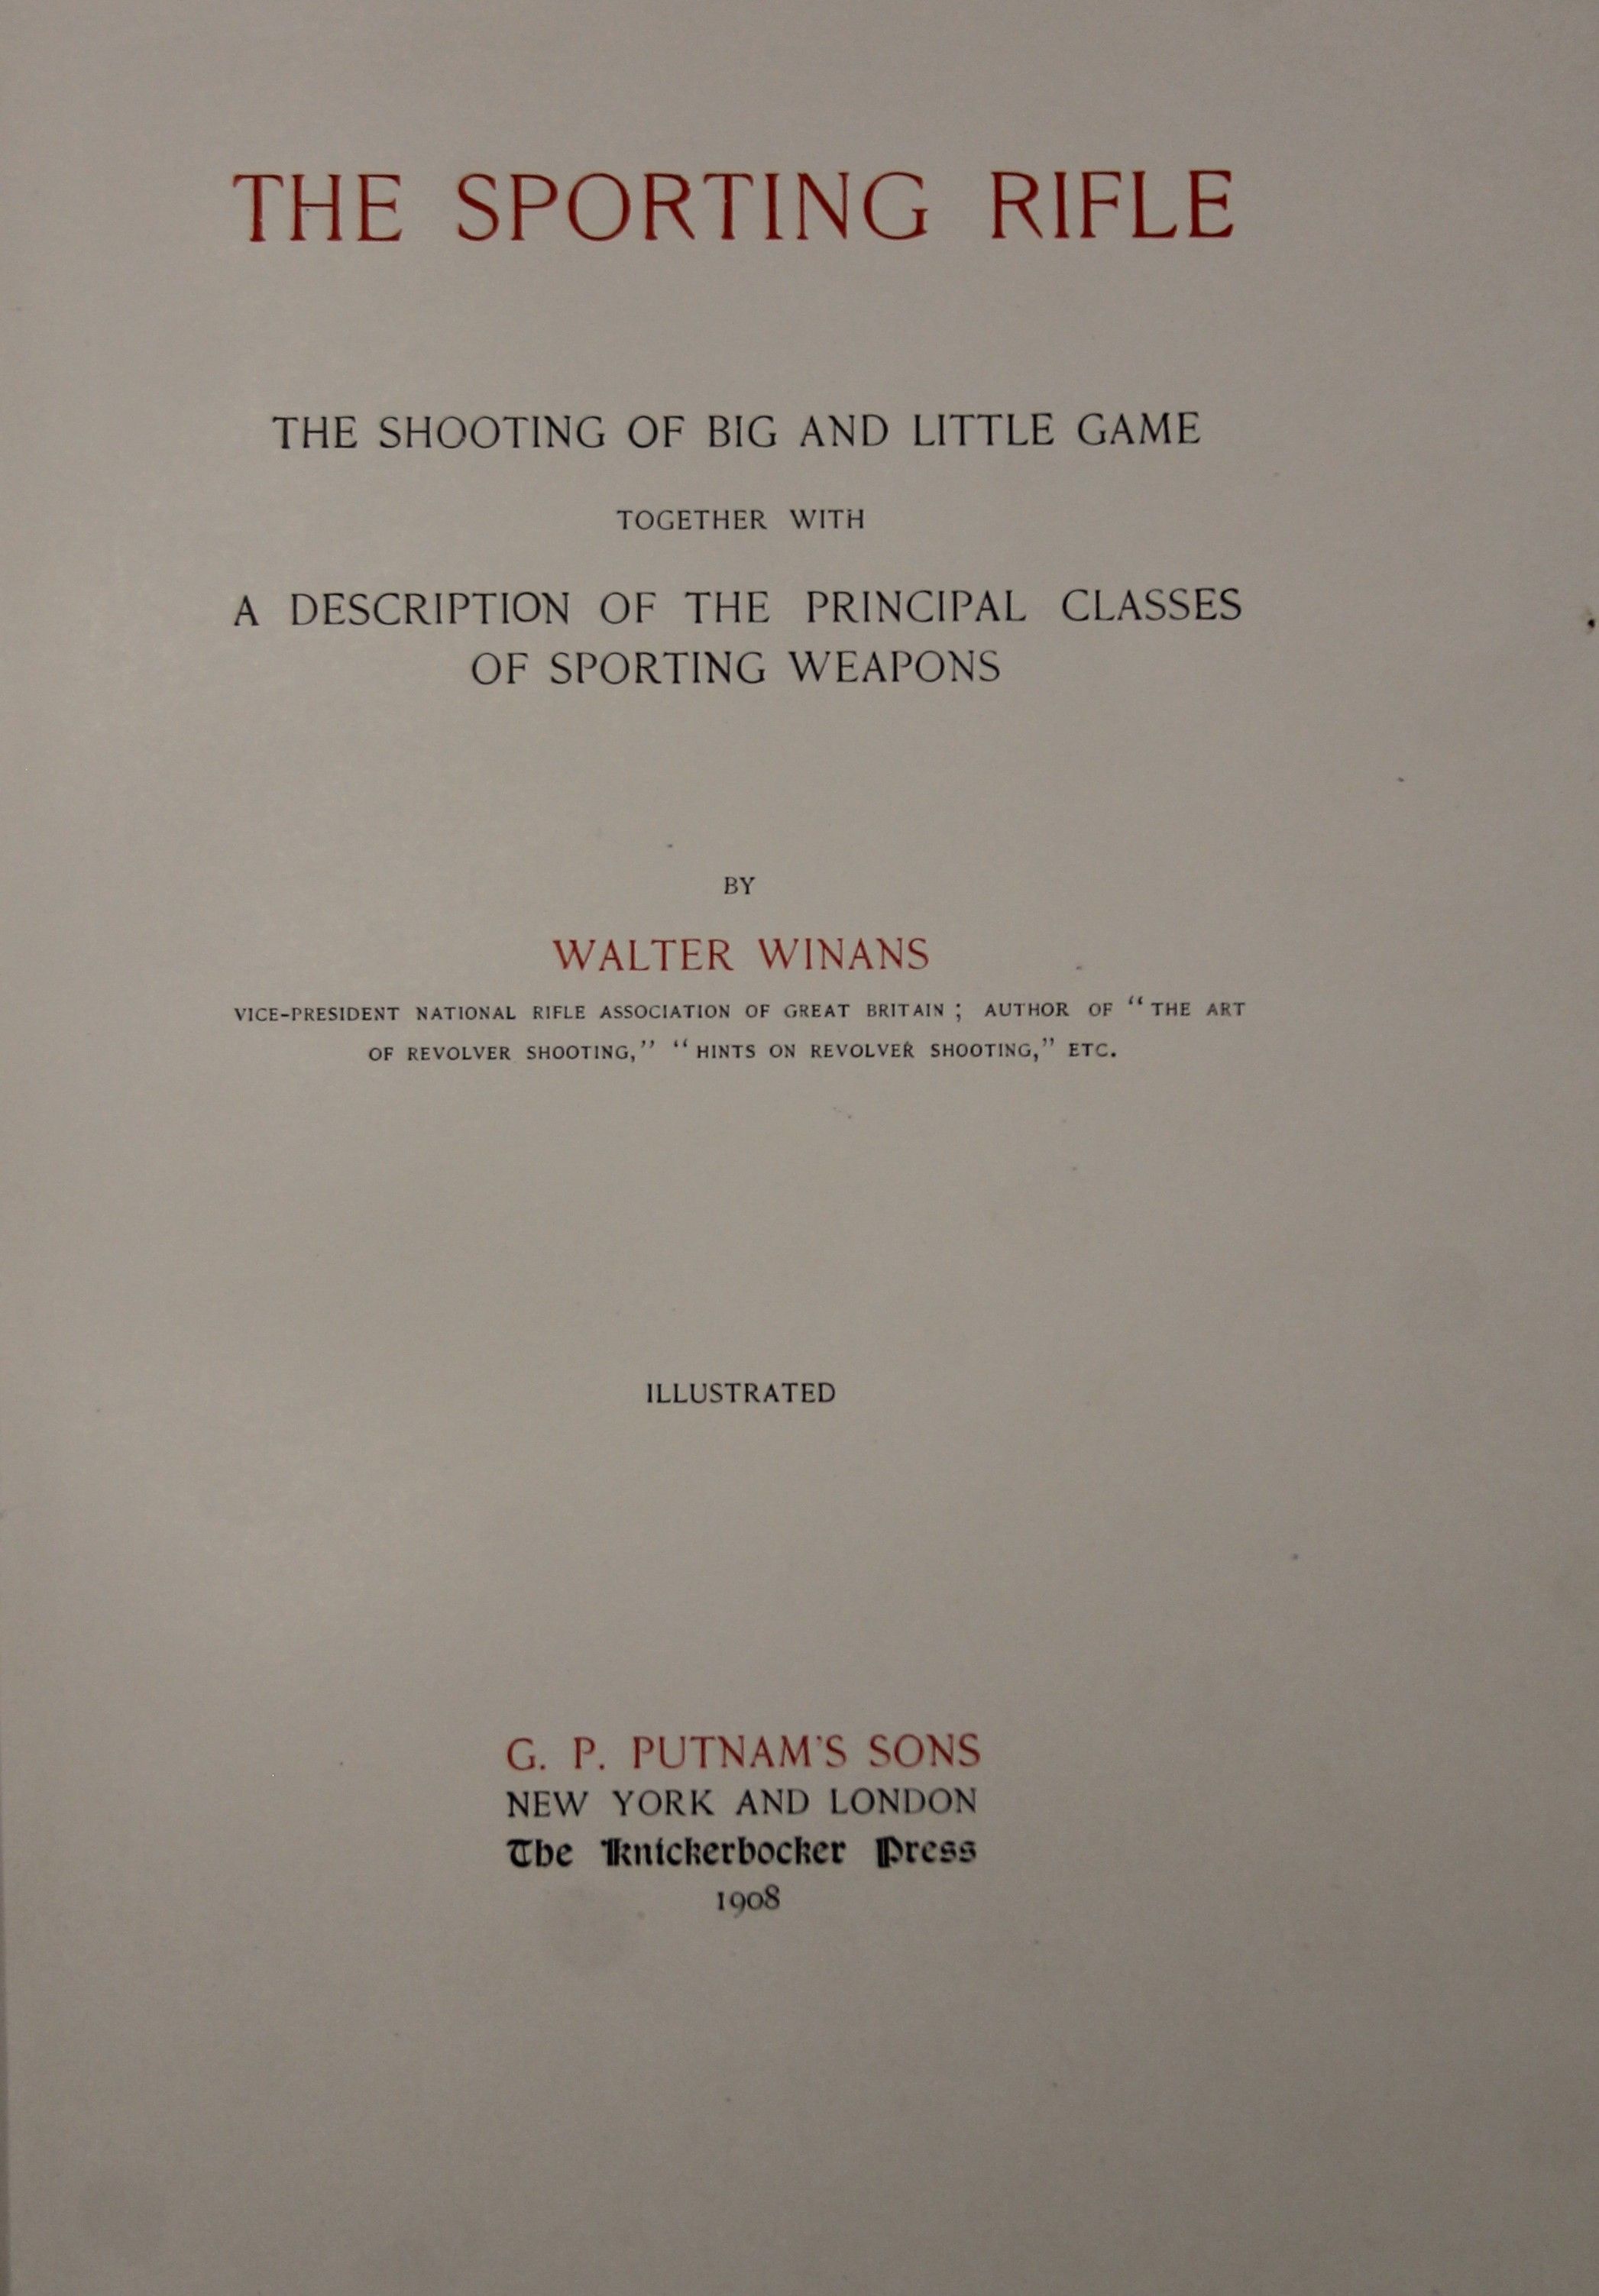 Walter Winans, The Sporting Rifle, 1908. - Image 3 of 6